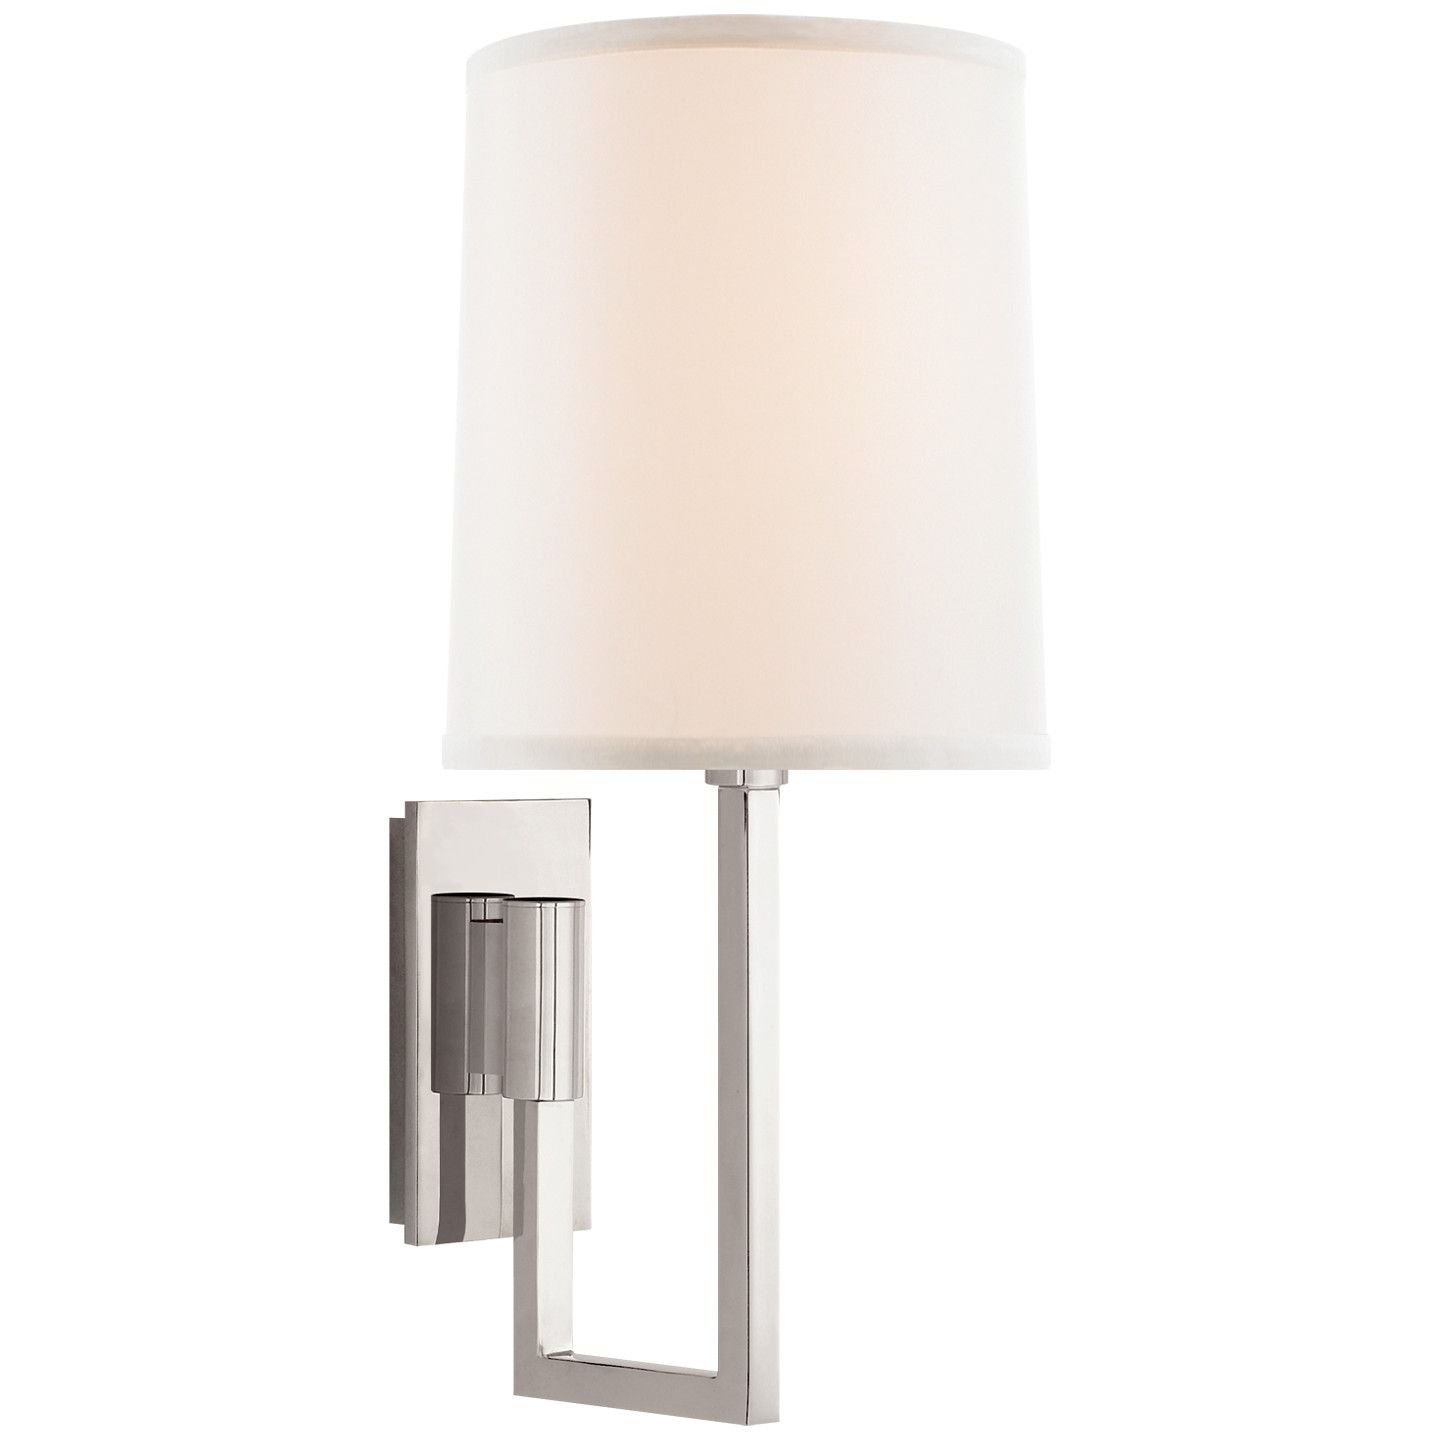 Aspect Library Sconce Polished Nickel